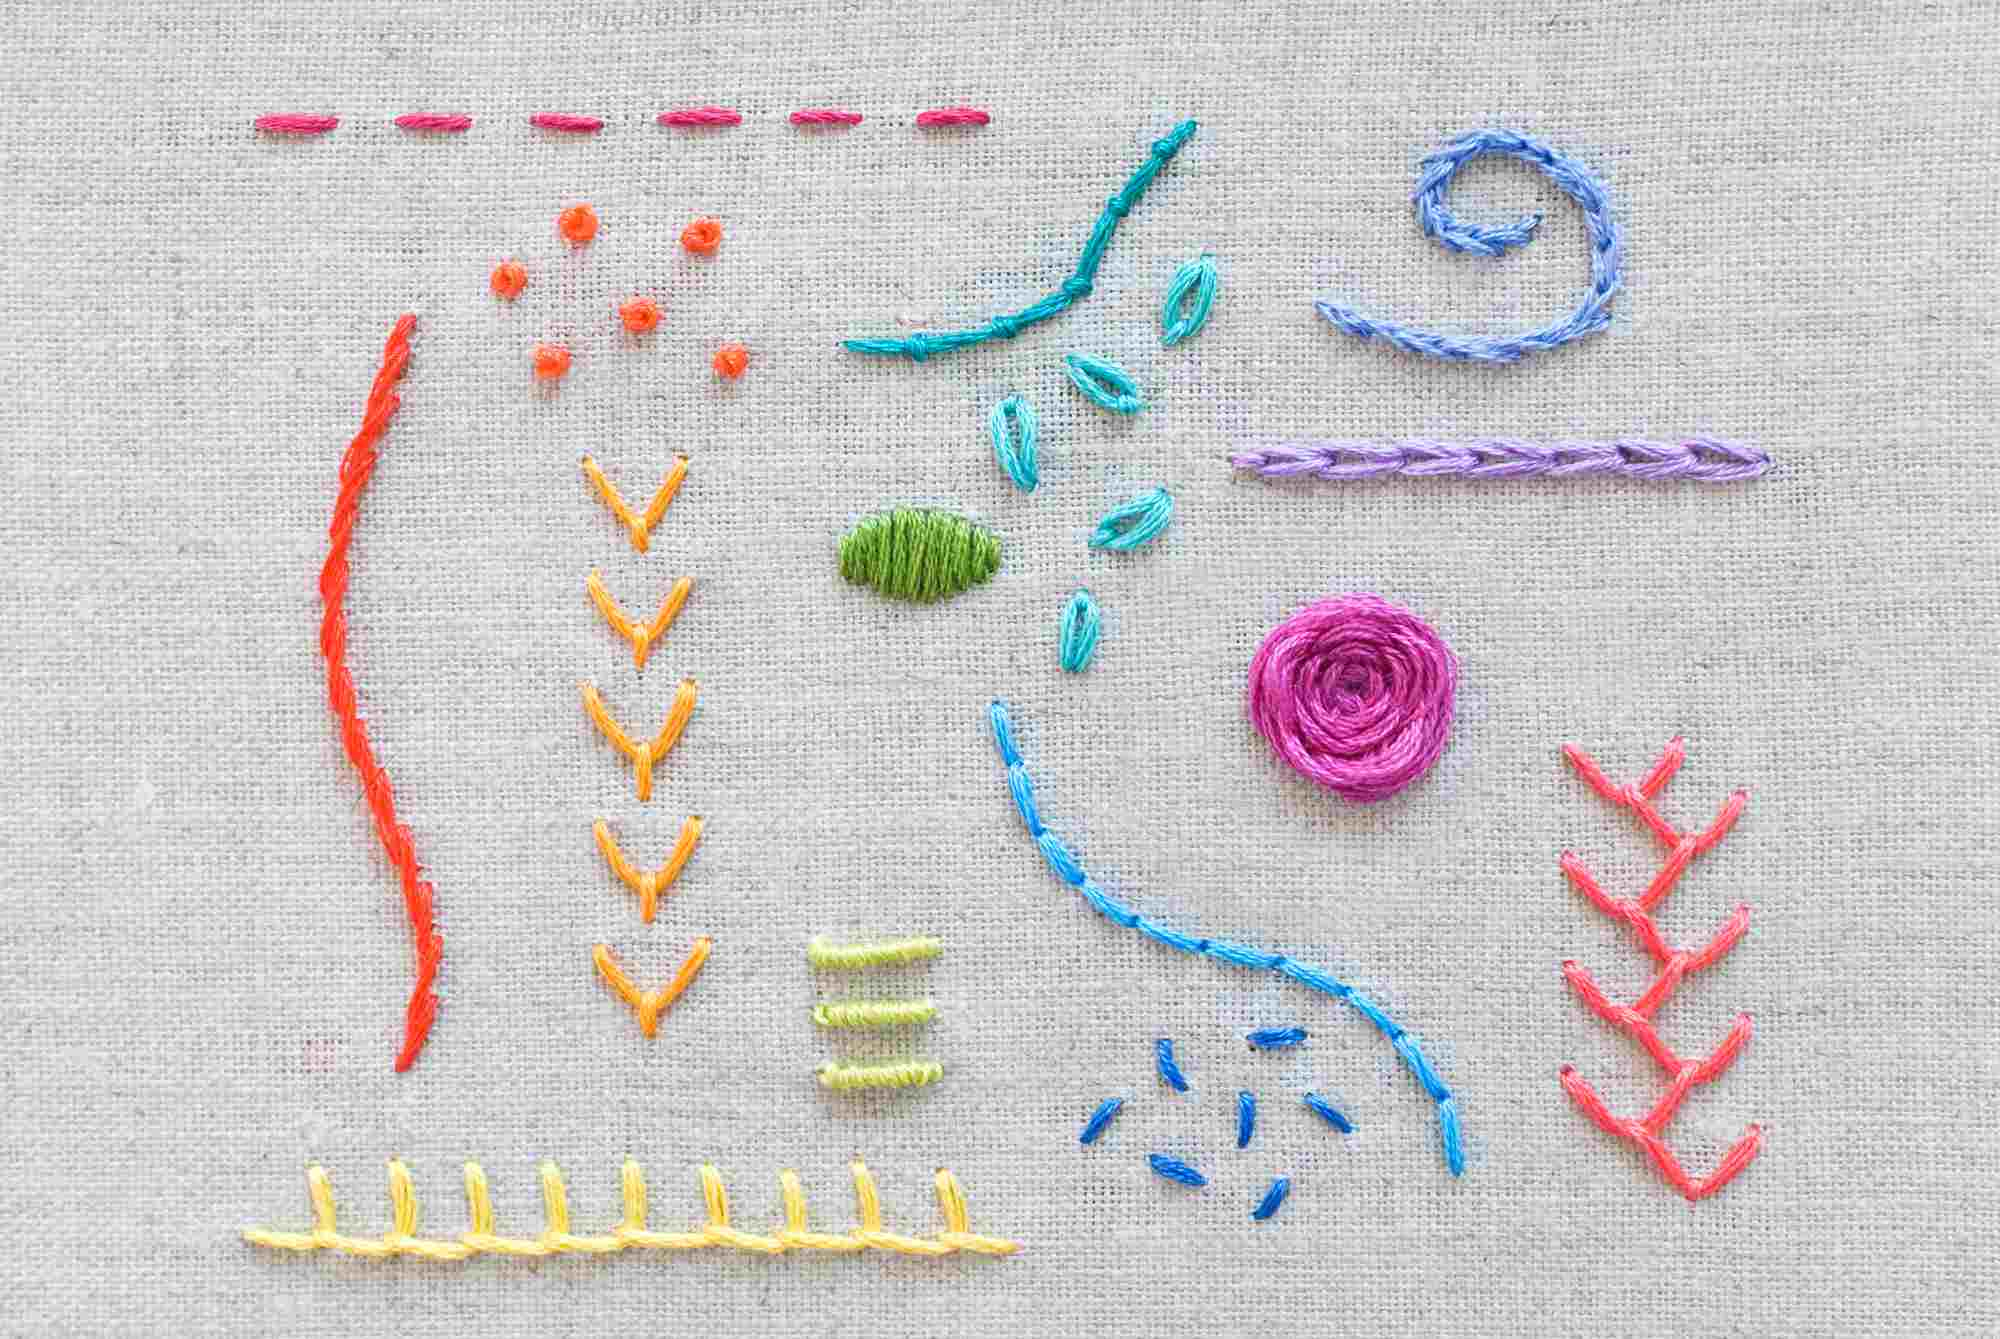 How To Create Embroidery Patterns 15 Stitches Every Embroiderer Should Know